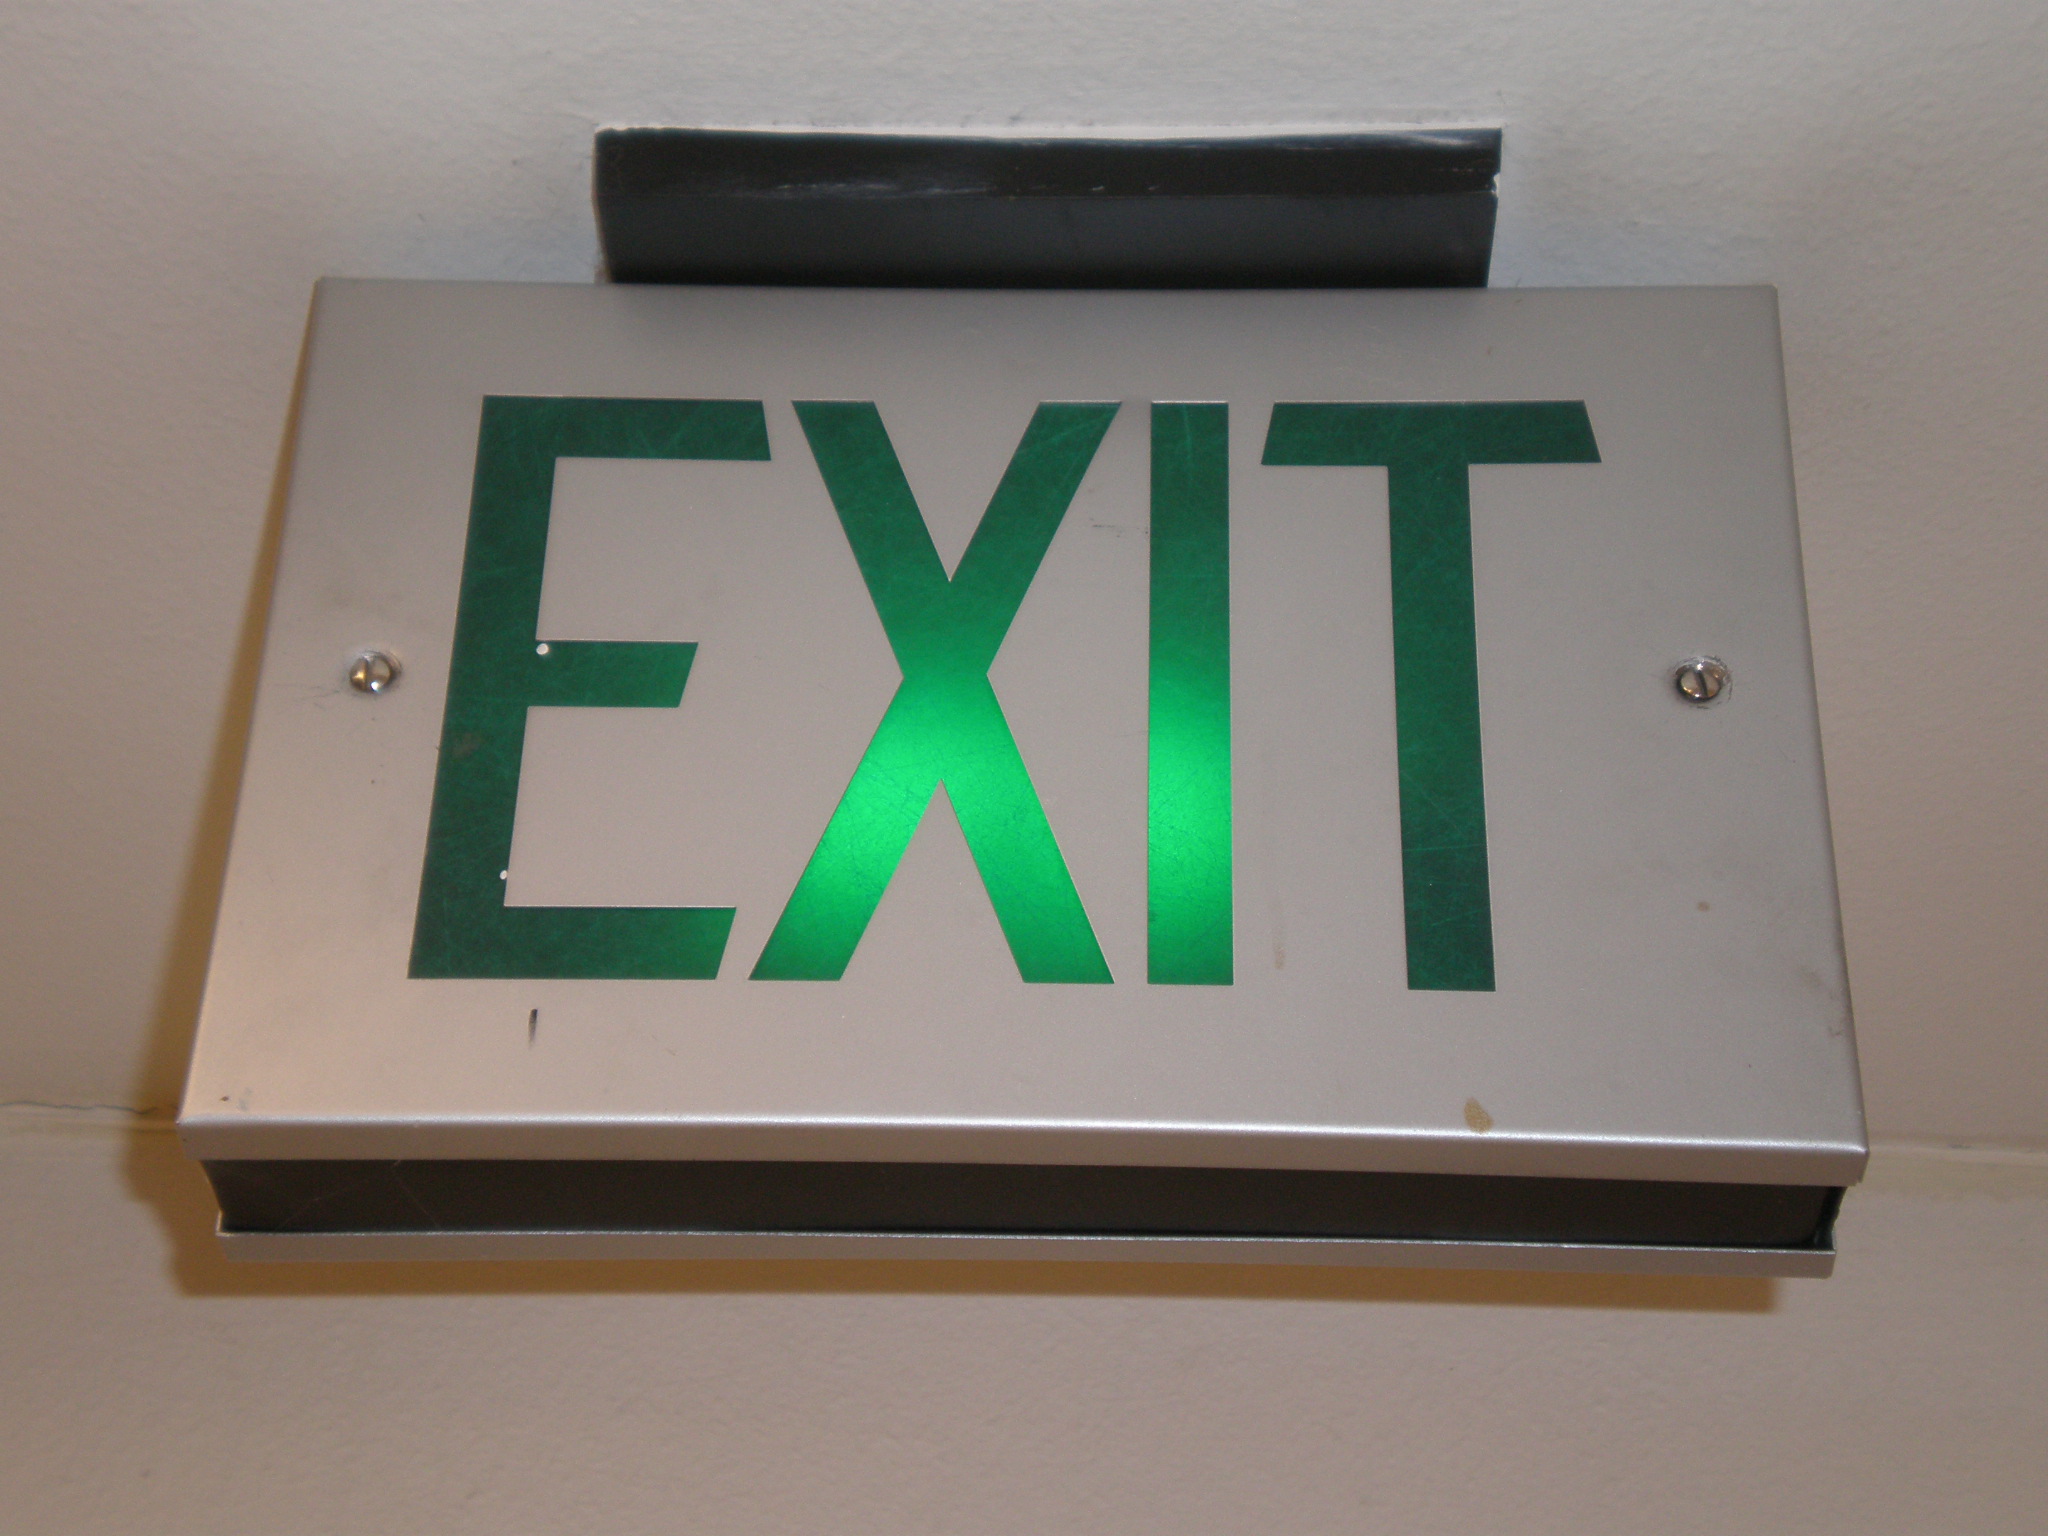 File:Metal exit sign with green text.JPG - Wikimedia Commons